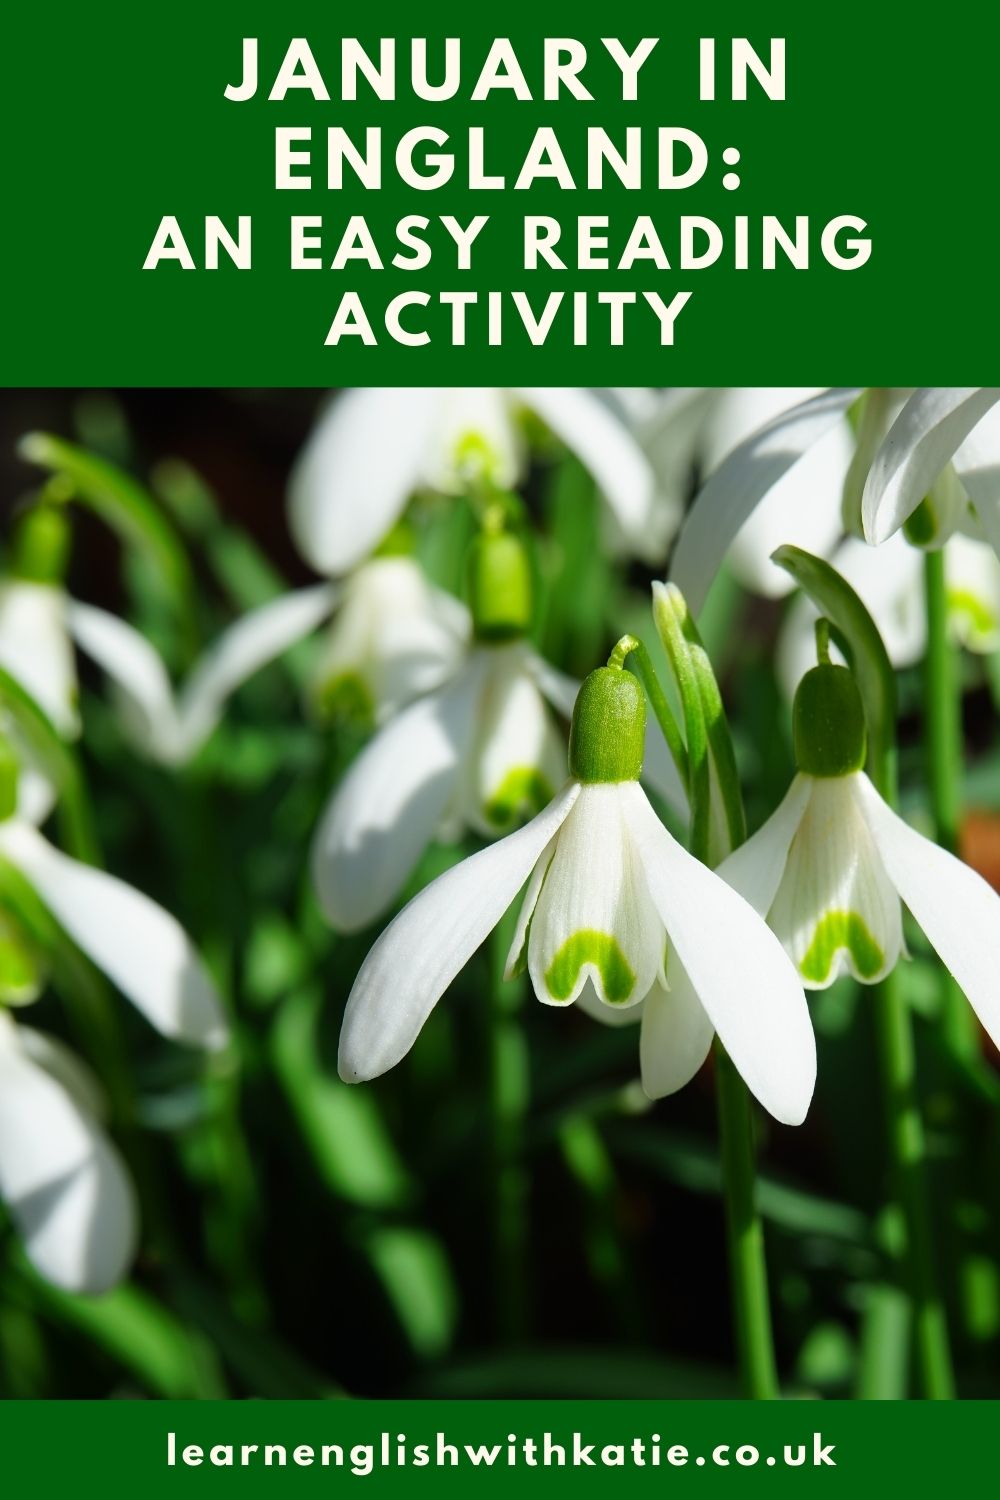 Pinterest pin showing image of snowdrops